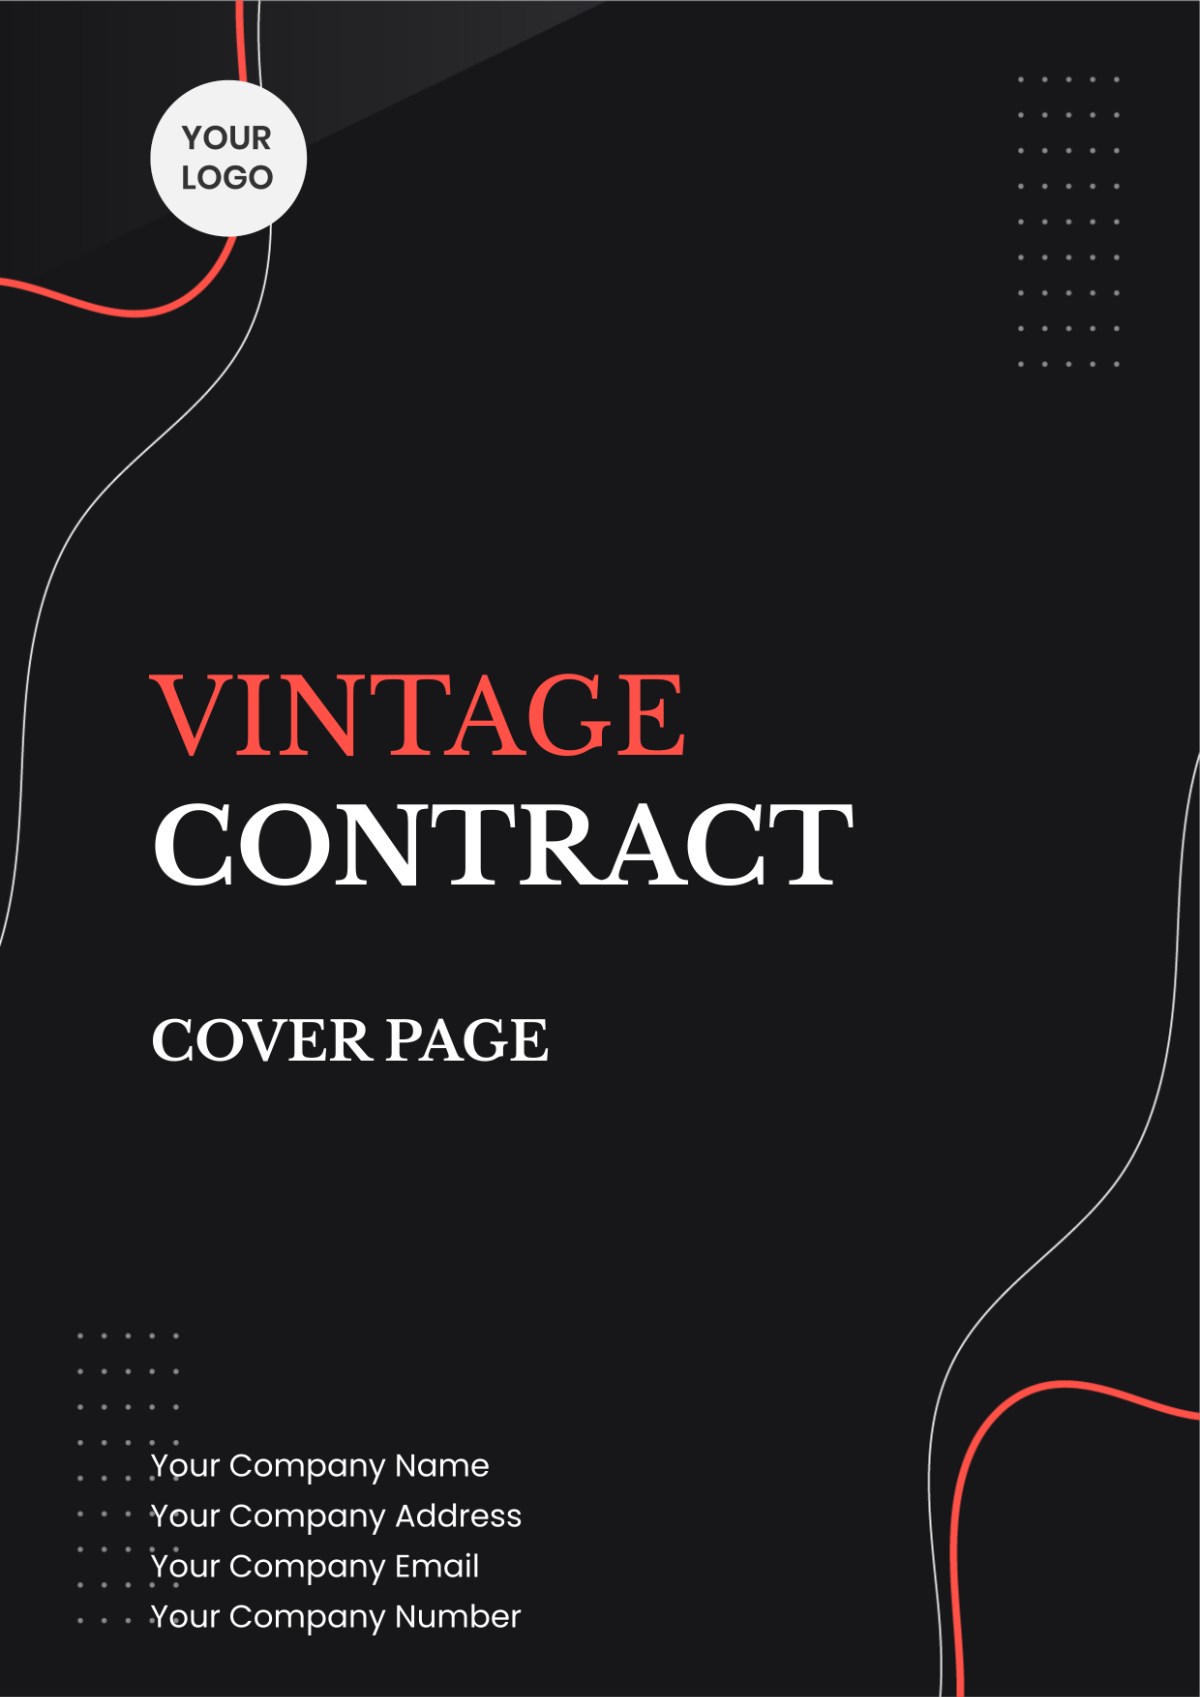 Vintage Contract Cover Page